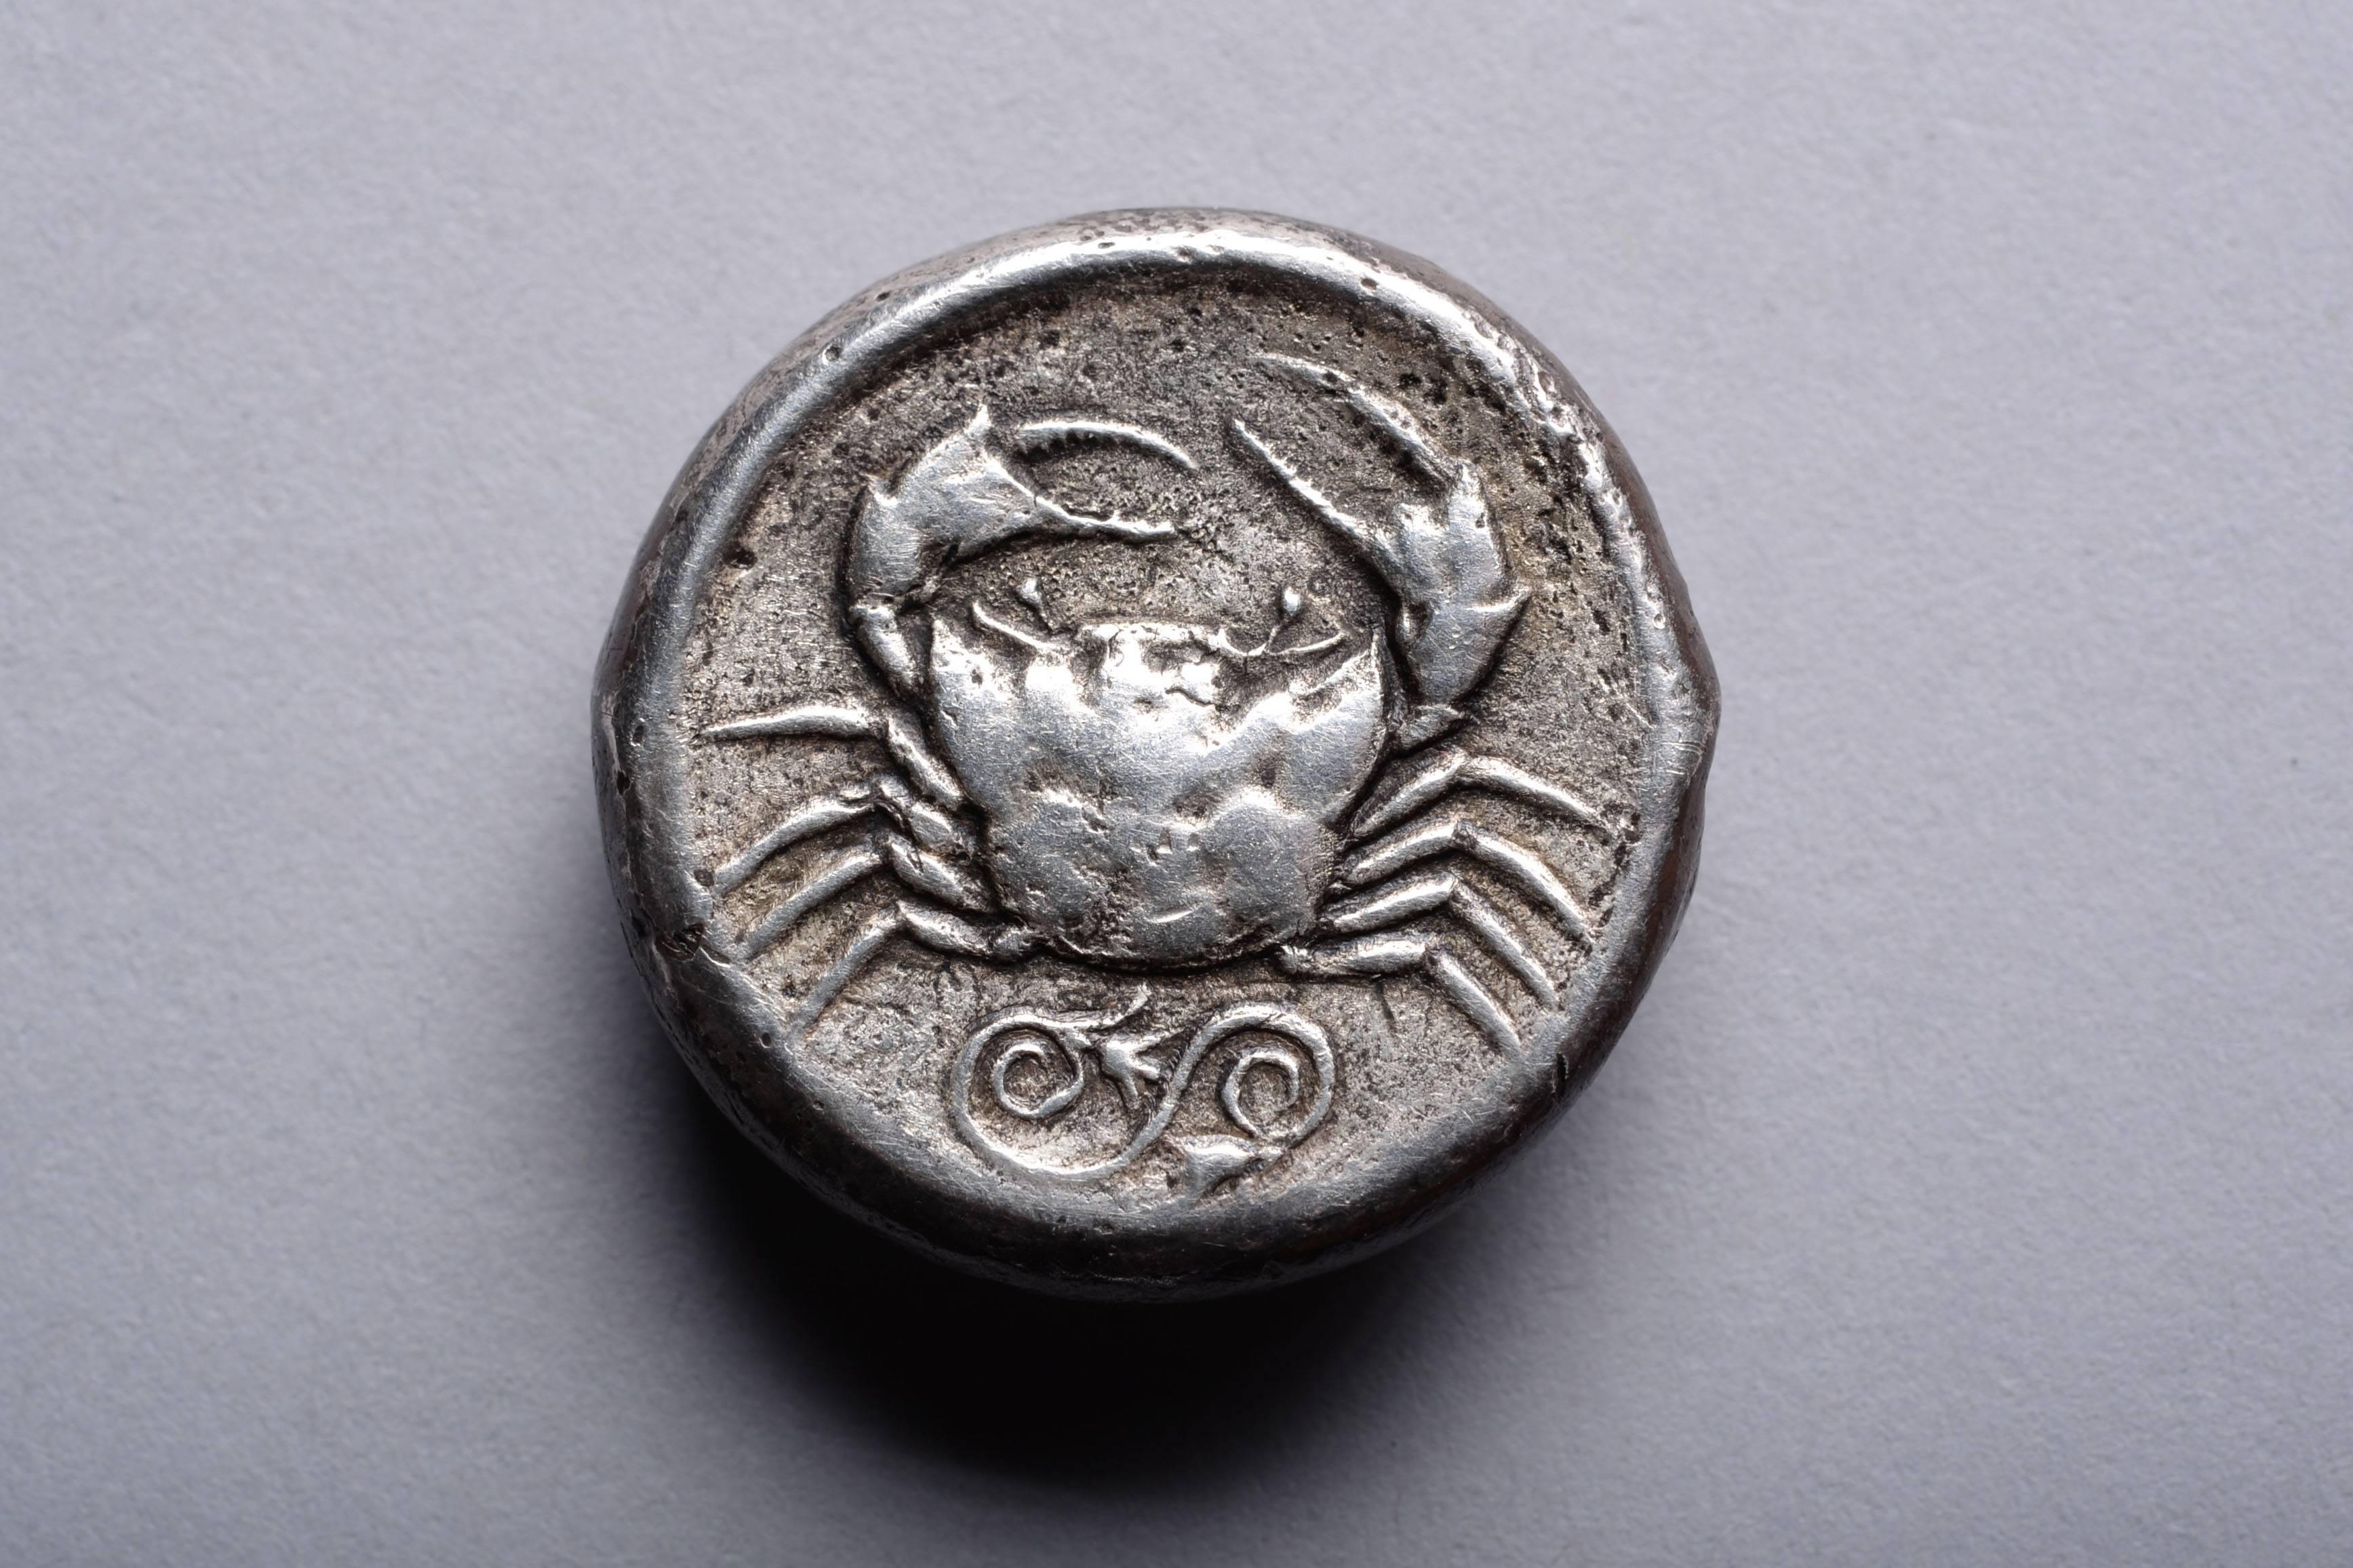 An ancient Greek silver tetradrachm coin from Akragas, Sicily. Minted, circa 460 - 446 BC.

The obverse with a sea eagle perching on top of an Ionic column. The Greek inscription reading:

AKRACANTOS

